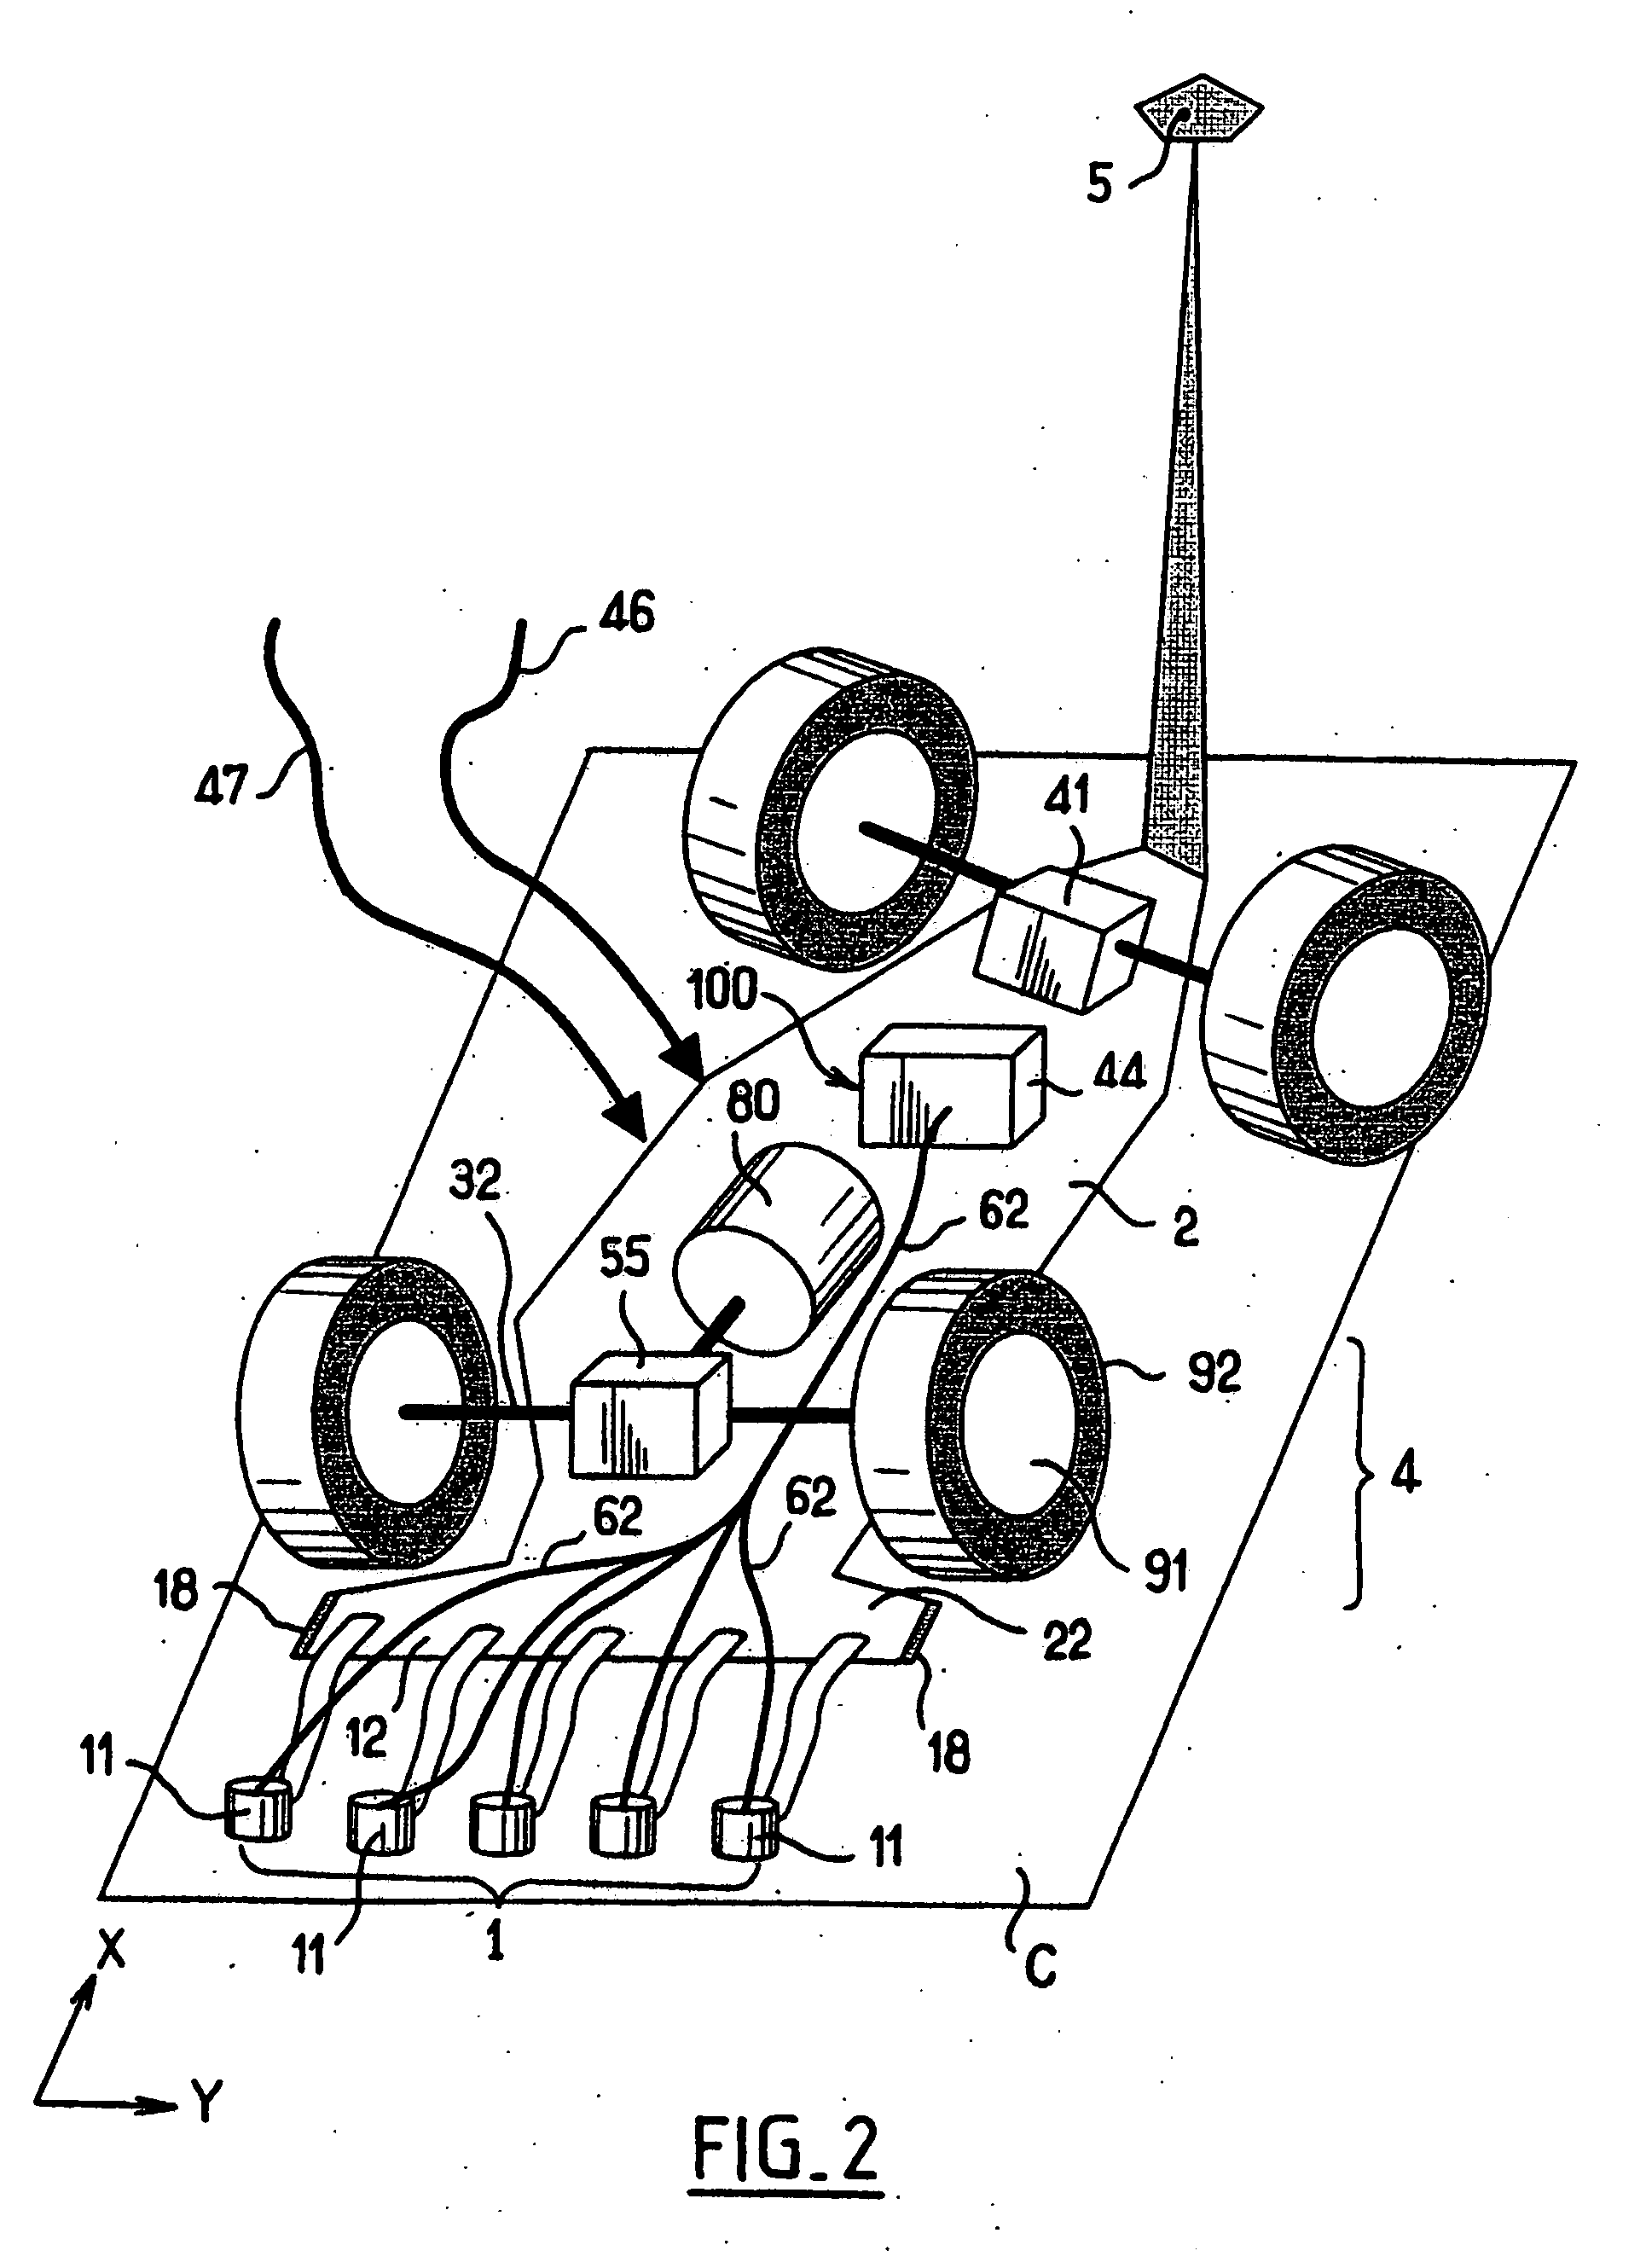 Tool, Sensor, and Device for a Wall Non-Distructive Control